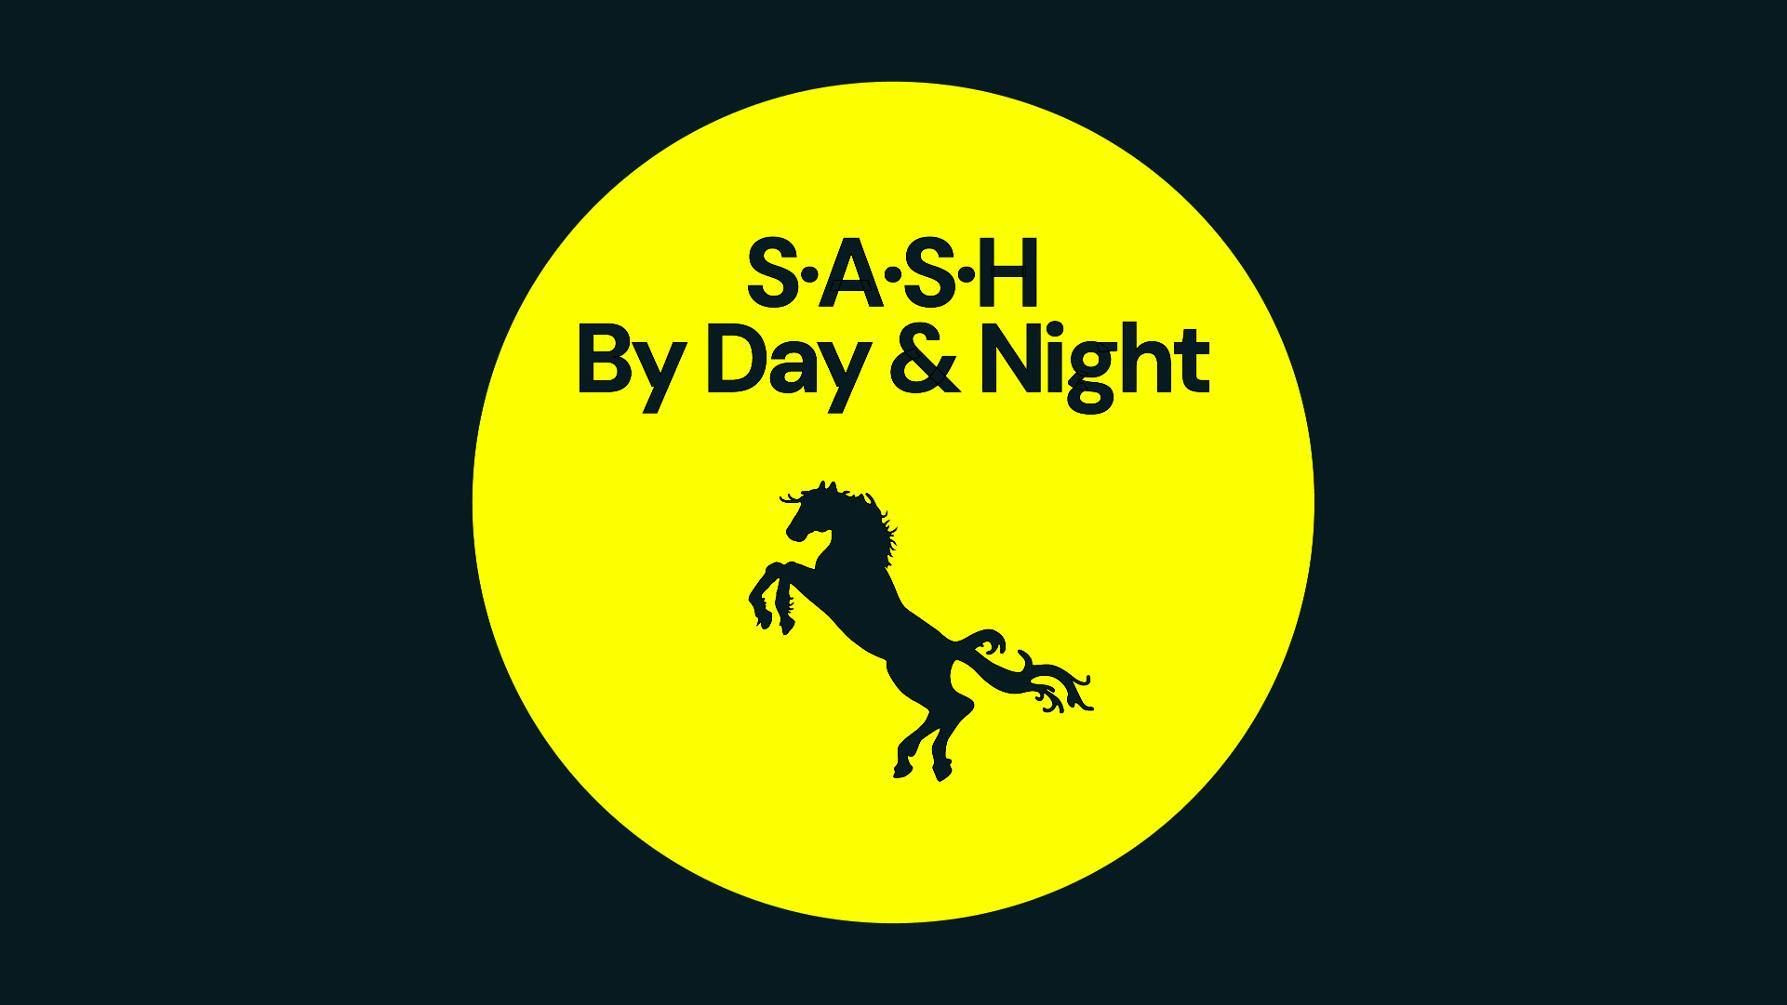 ★ S.A.S.H By Day & Night ★ Sunday 7th July ★